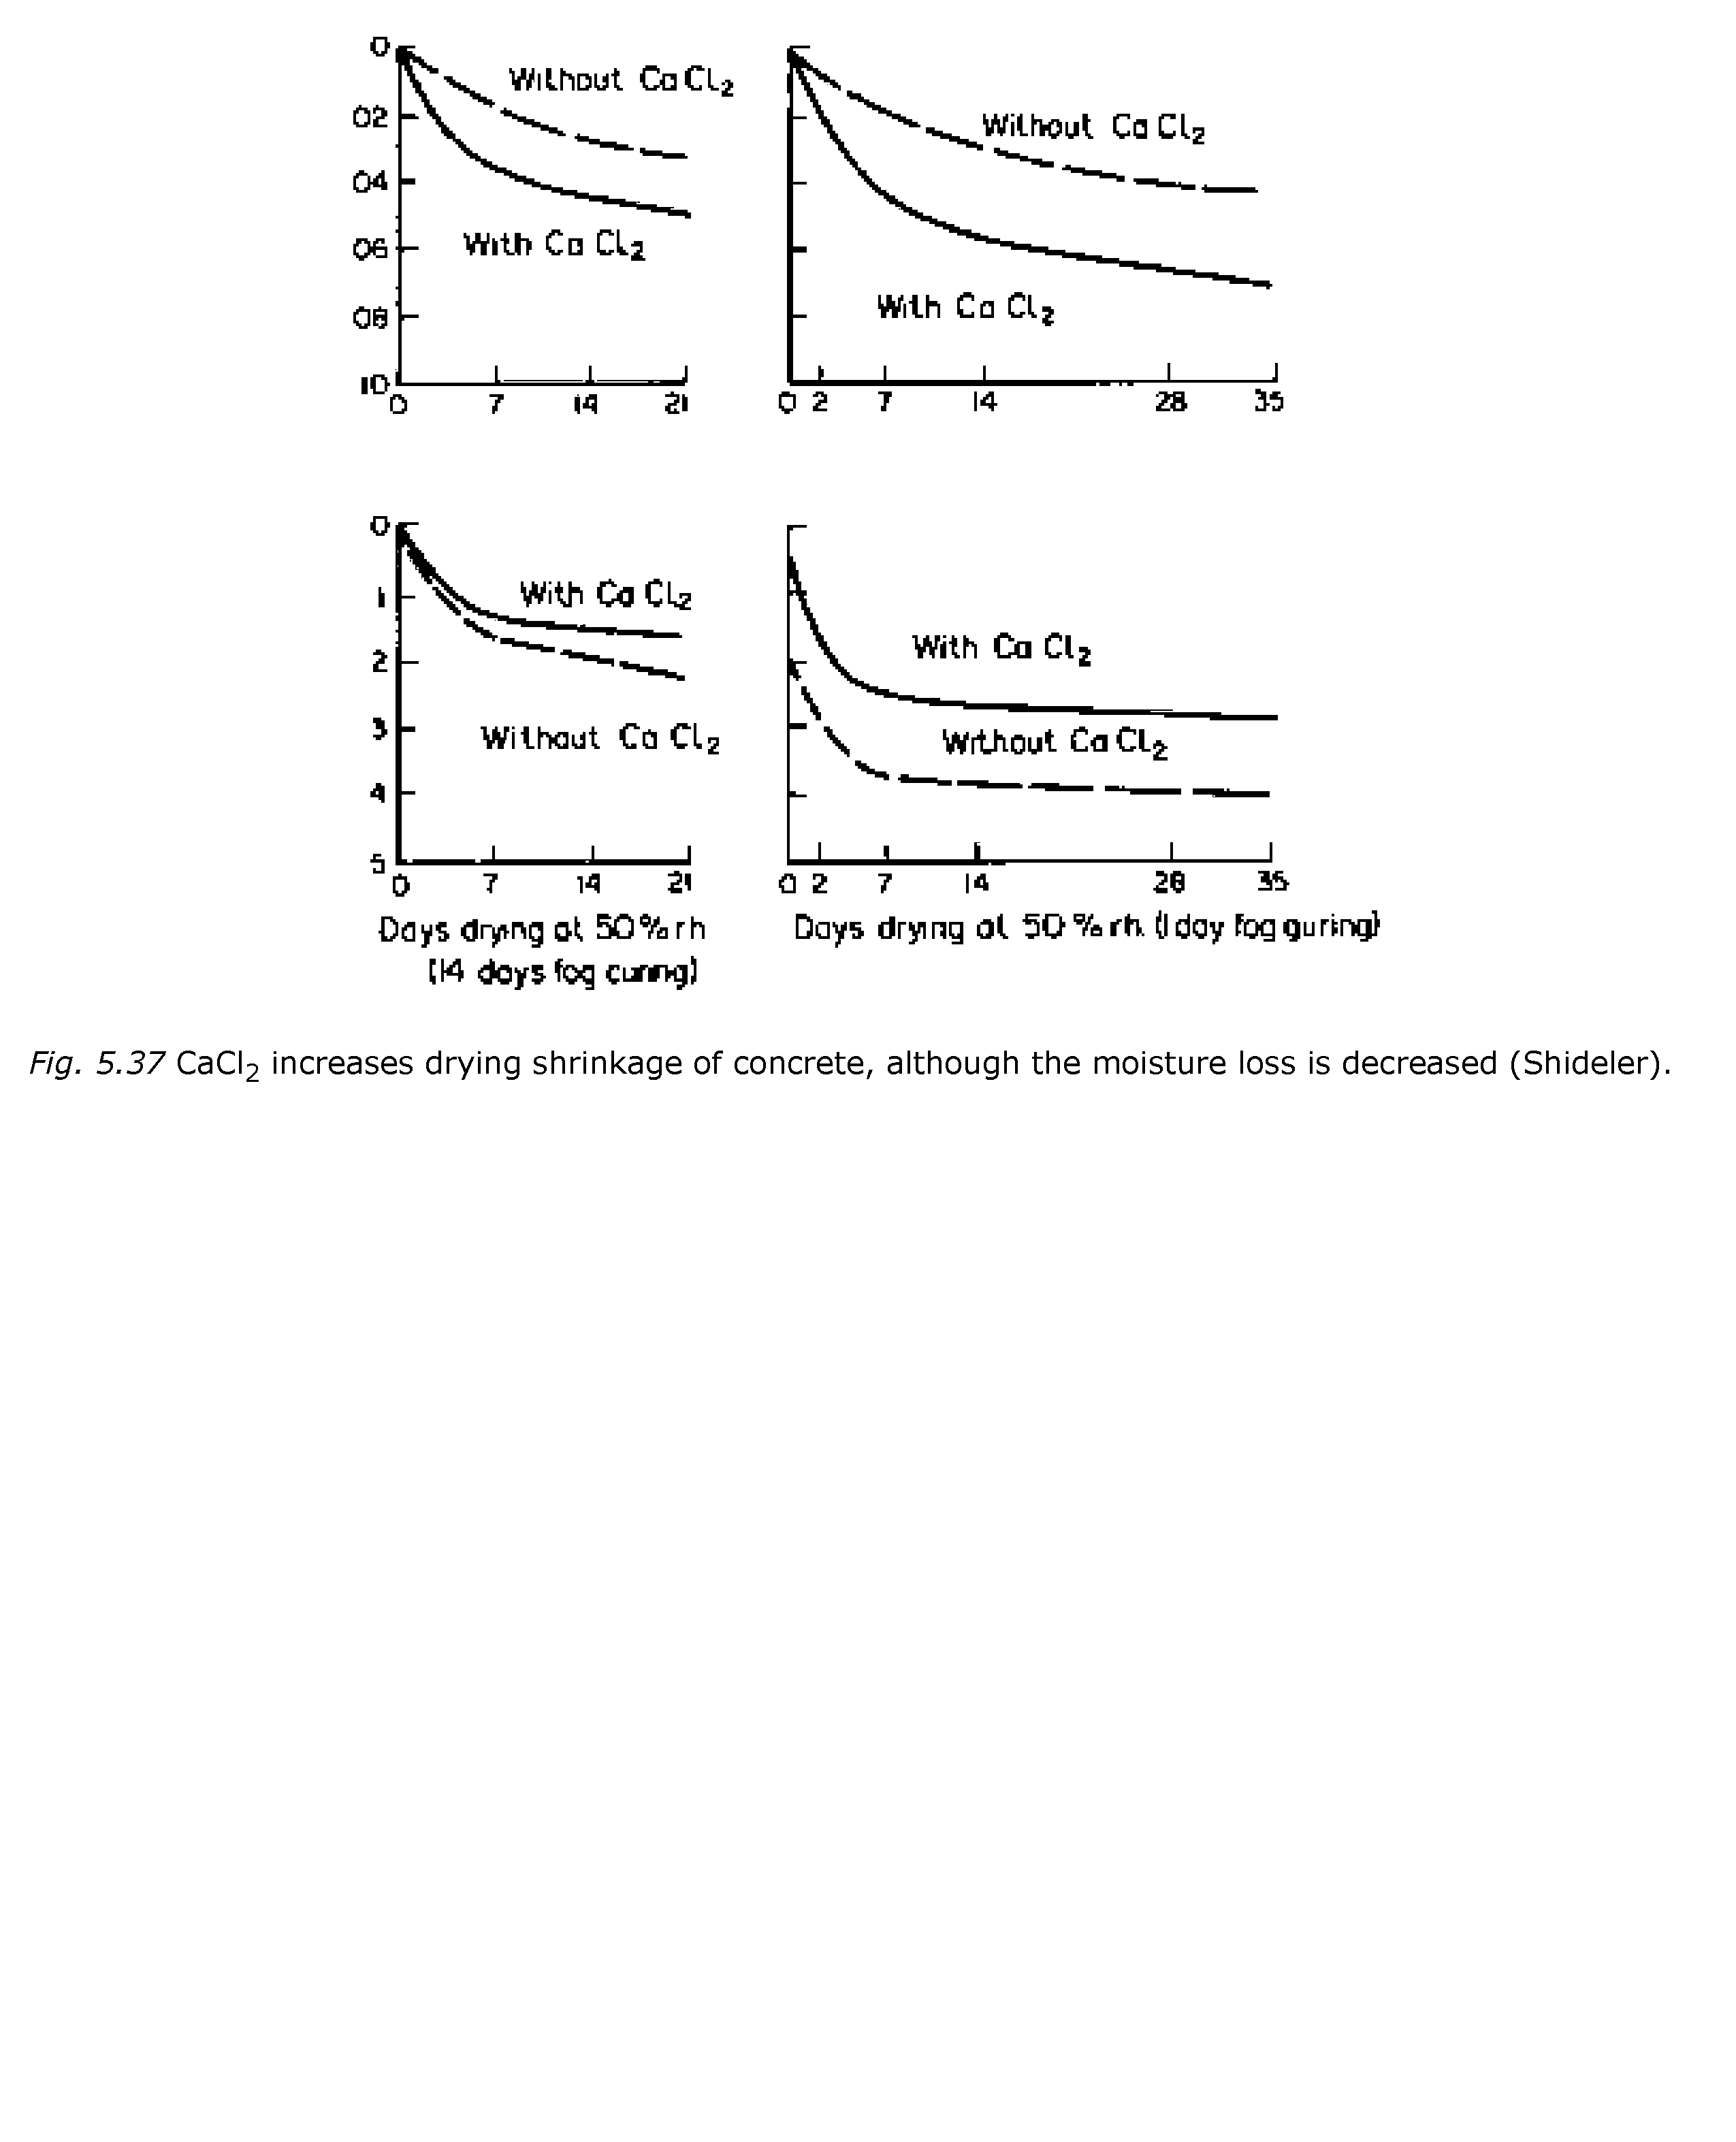 Fig. 5.37 CaCl2 increases drying shrinkage of concrete, although the moisture loss is decreased (Shideler).